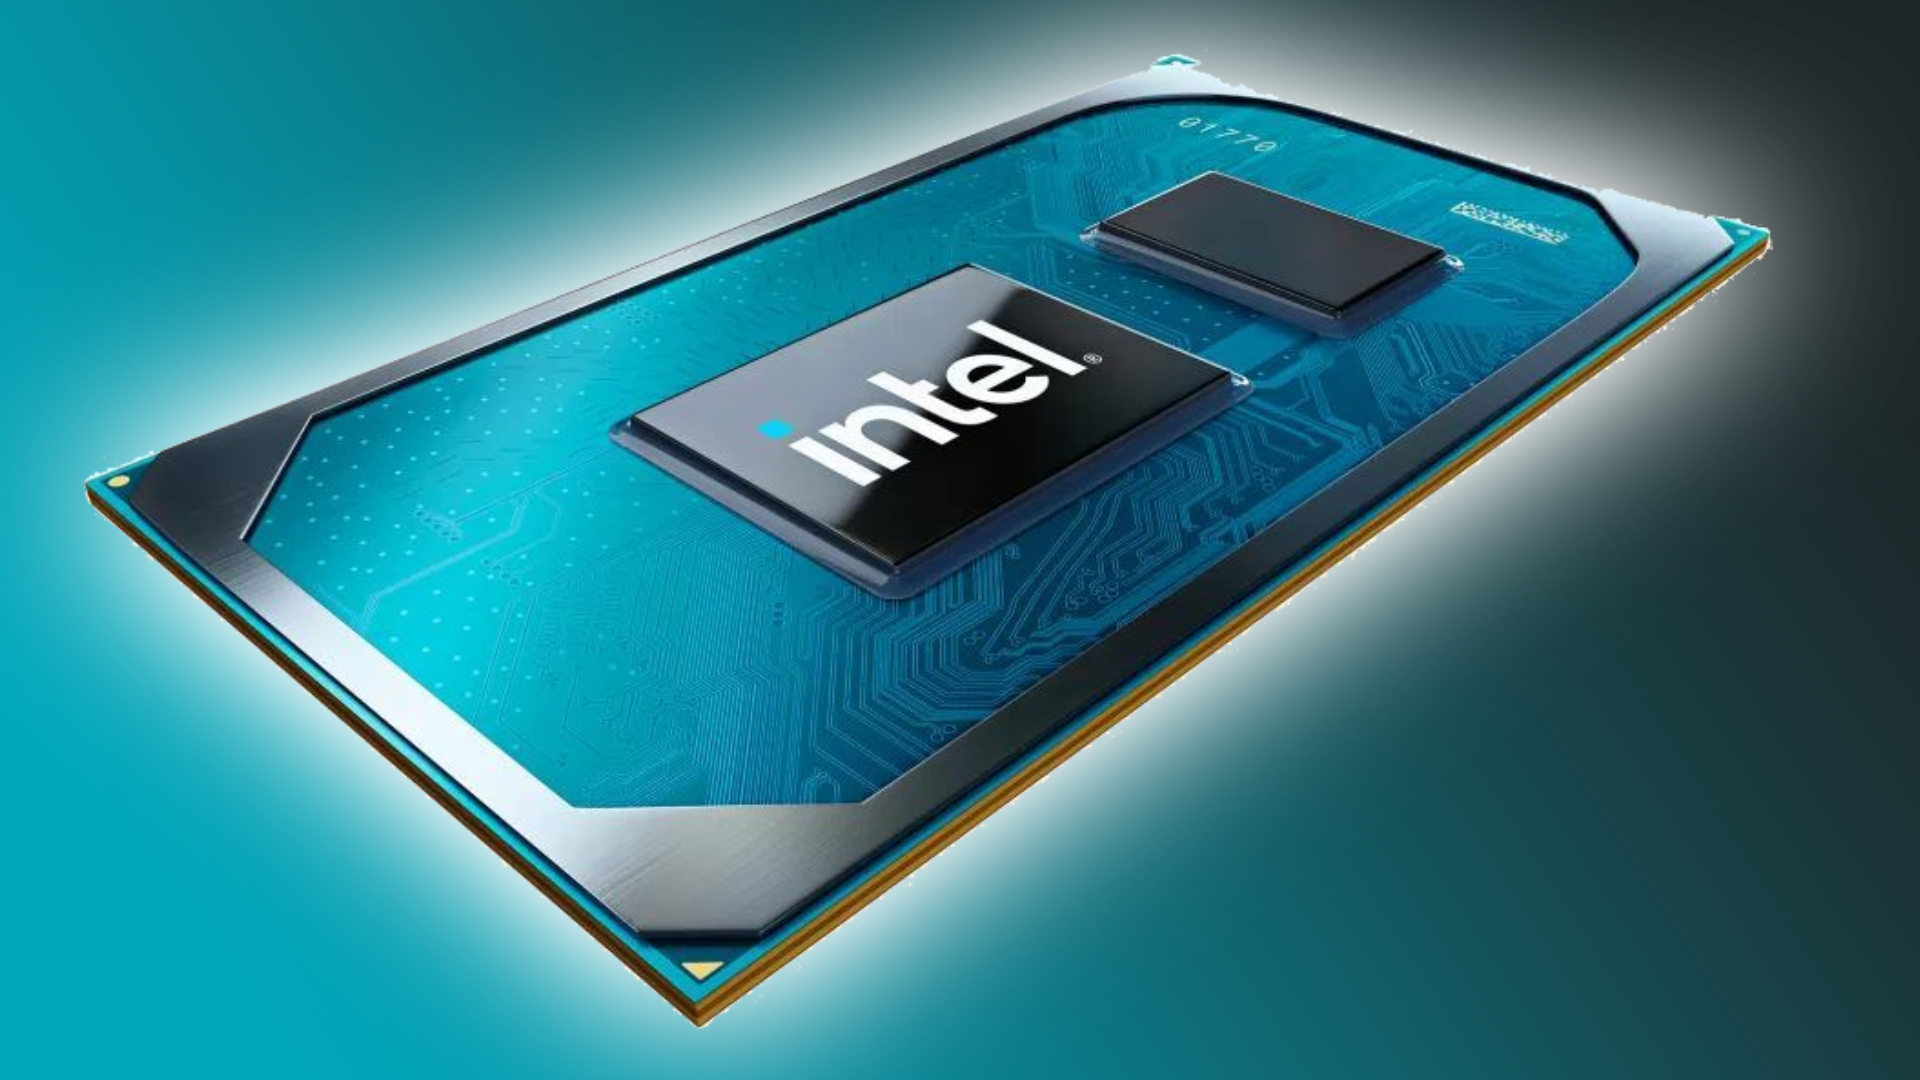 Intel Meteor Lake CPUs could require a motherboard upgrade